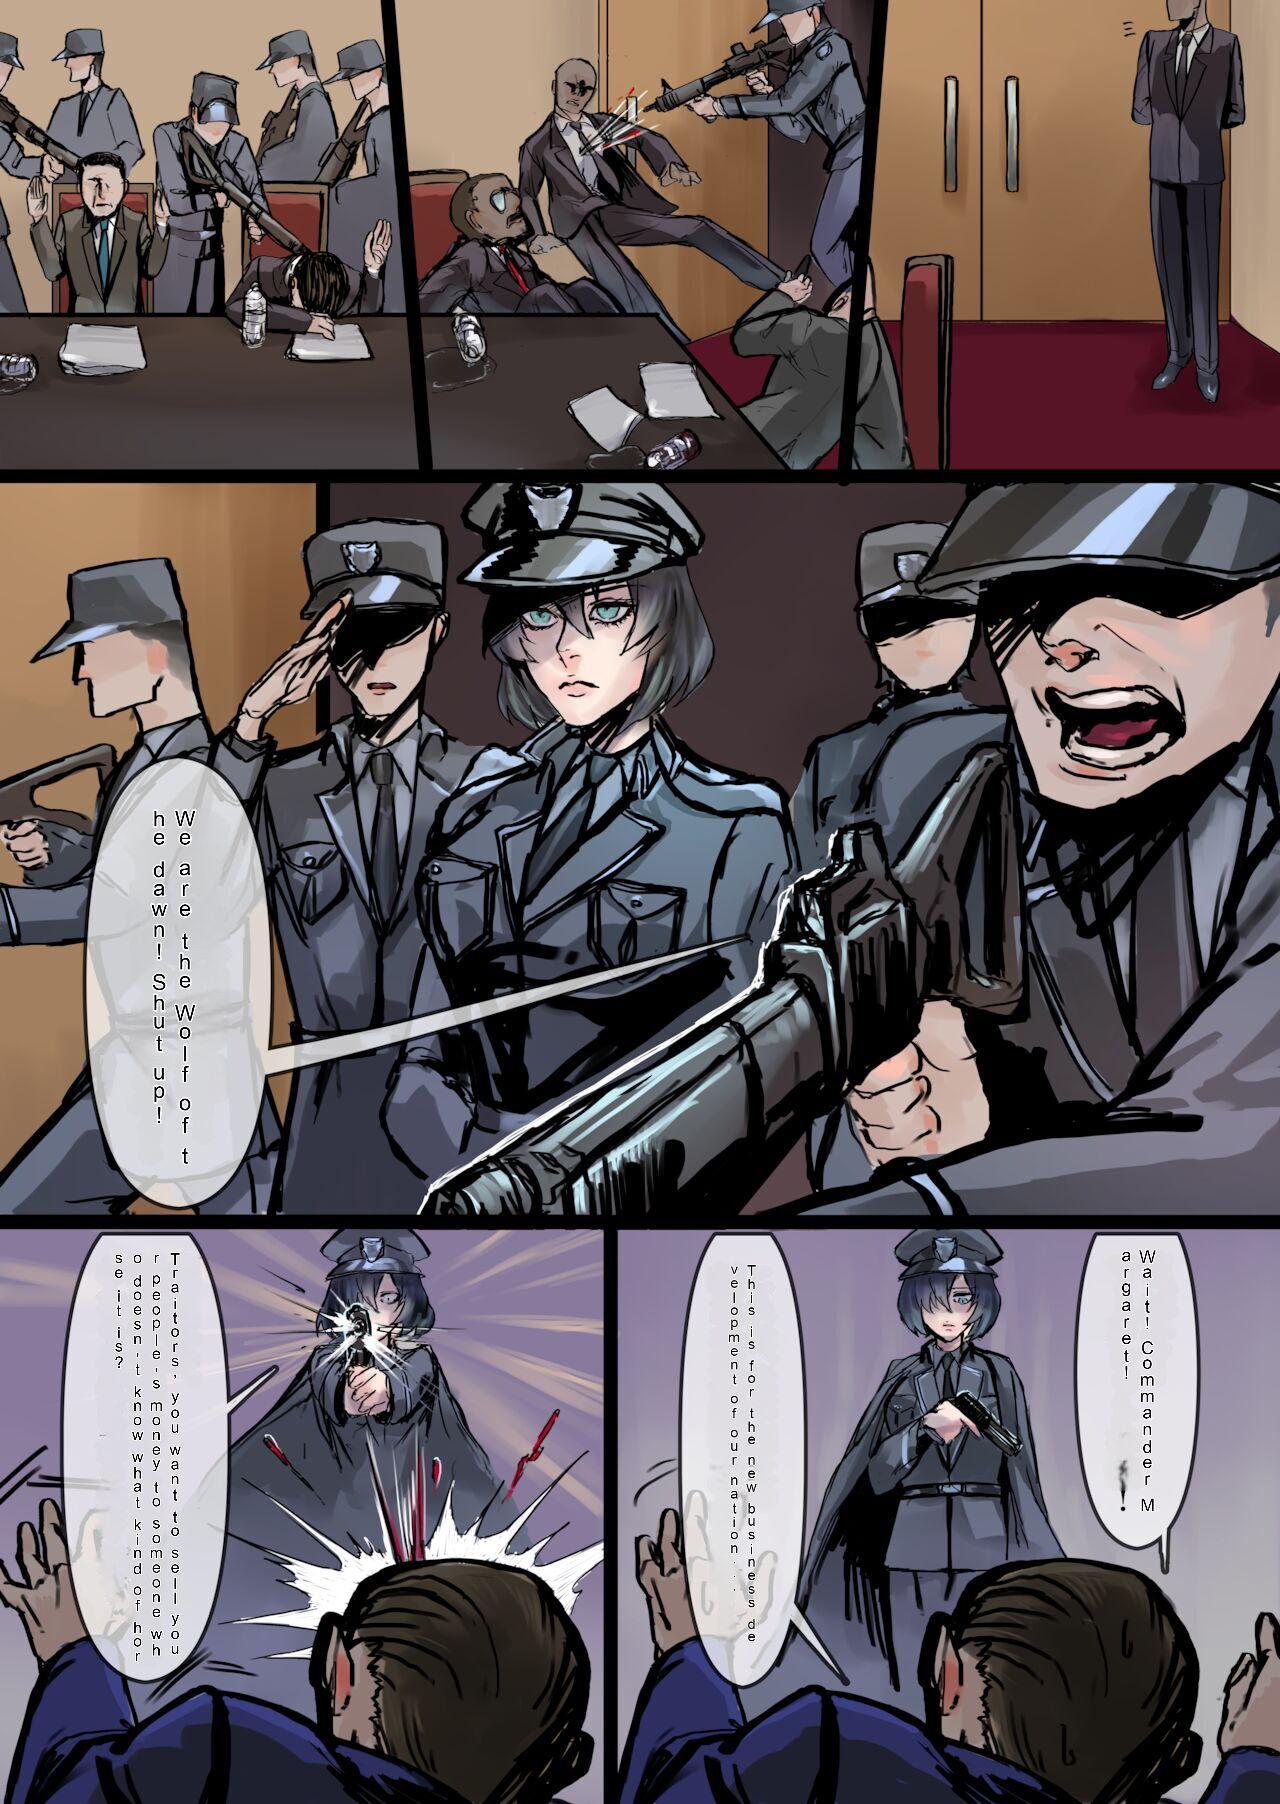 Party Divided Daily Life of a Certain Soldier Fist - Page 3